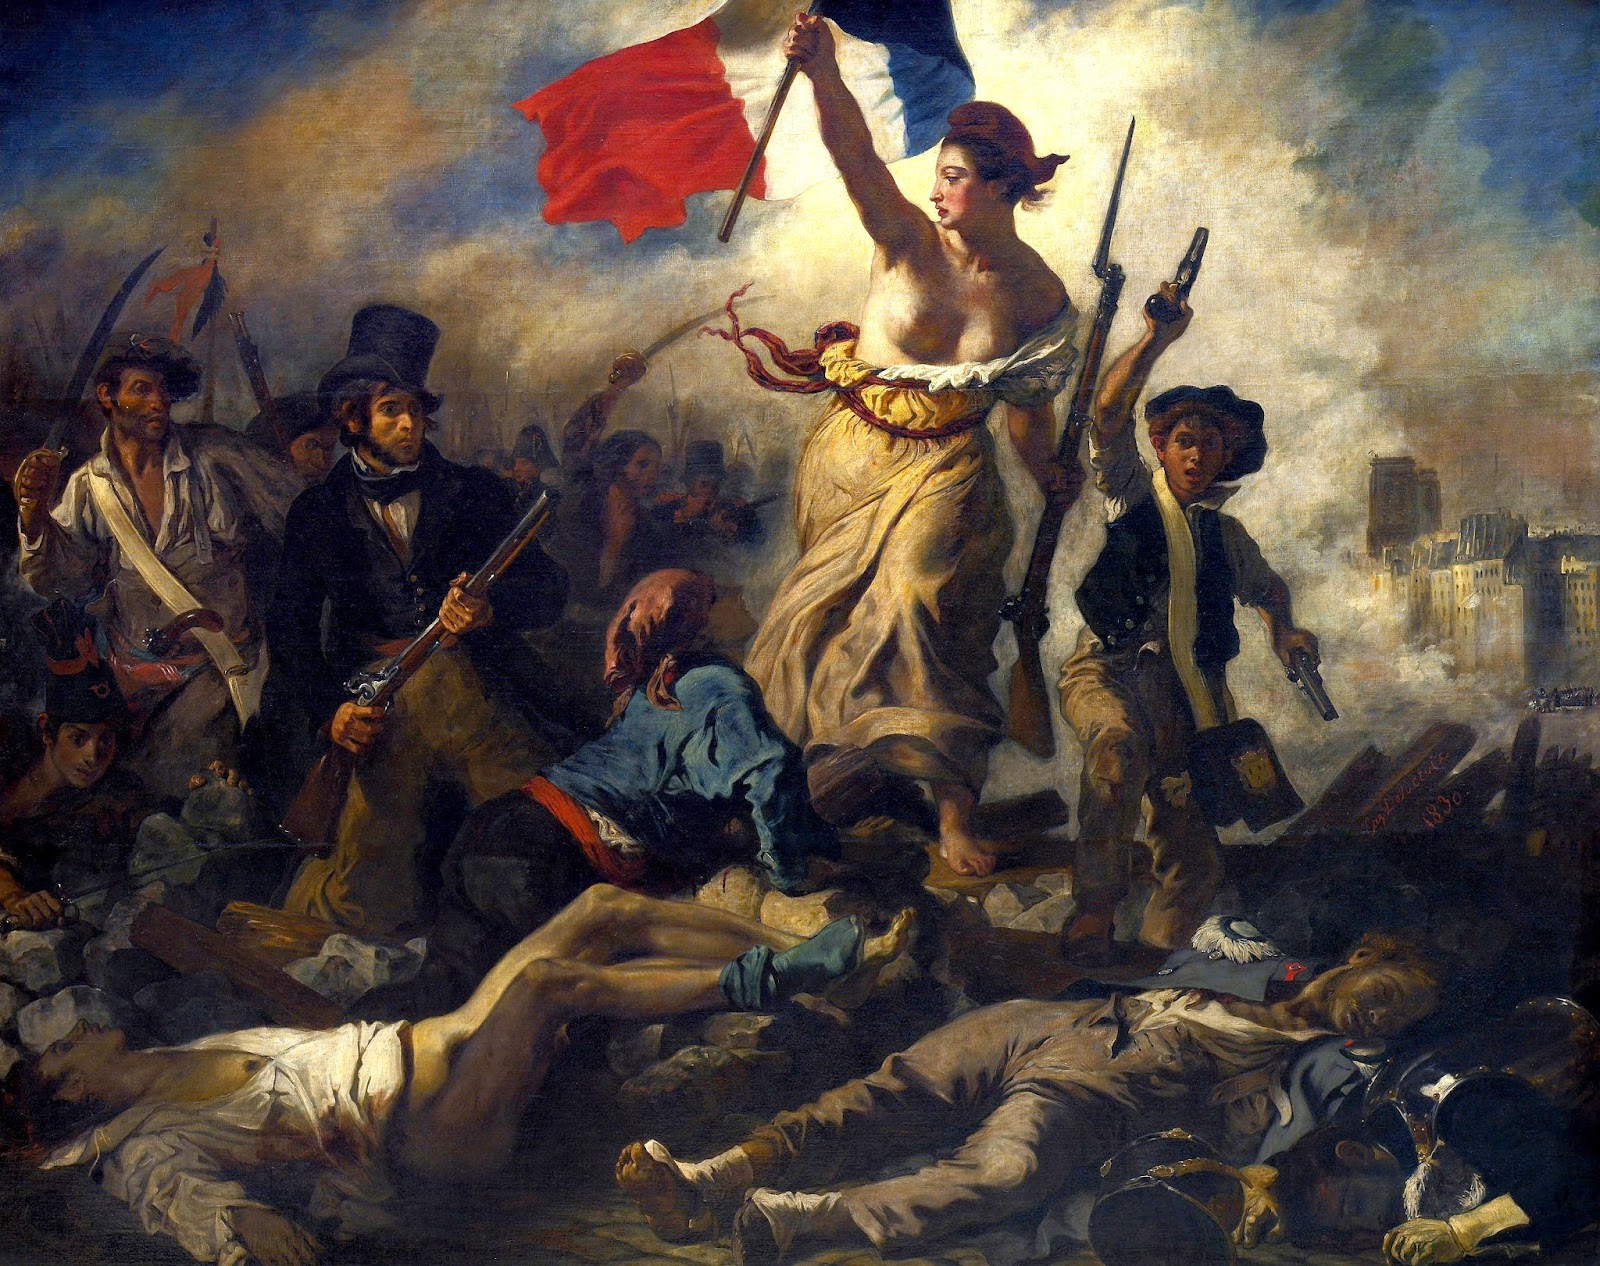 Social Studies 20 The French Revolution and the Rise of Nationalism